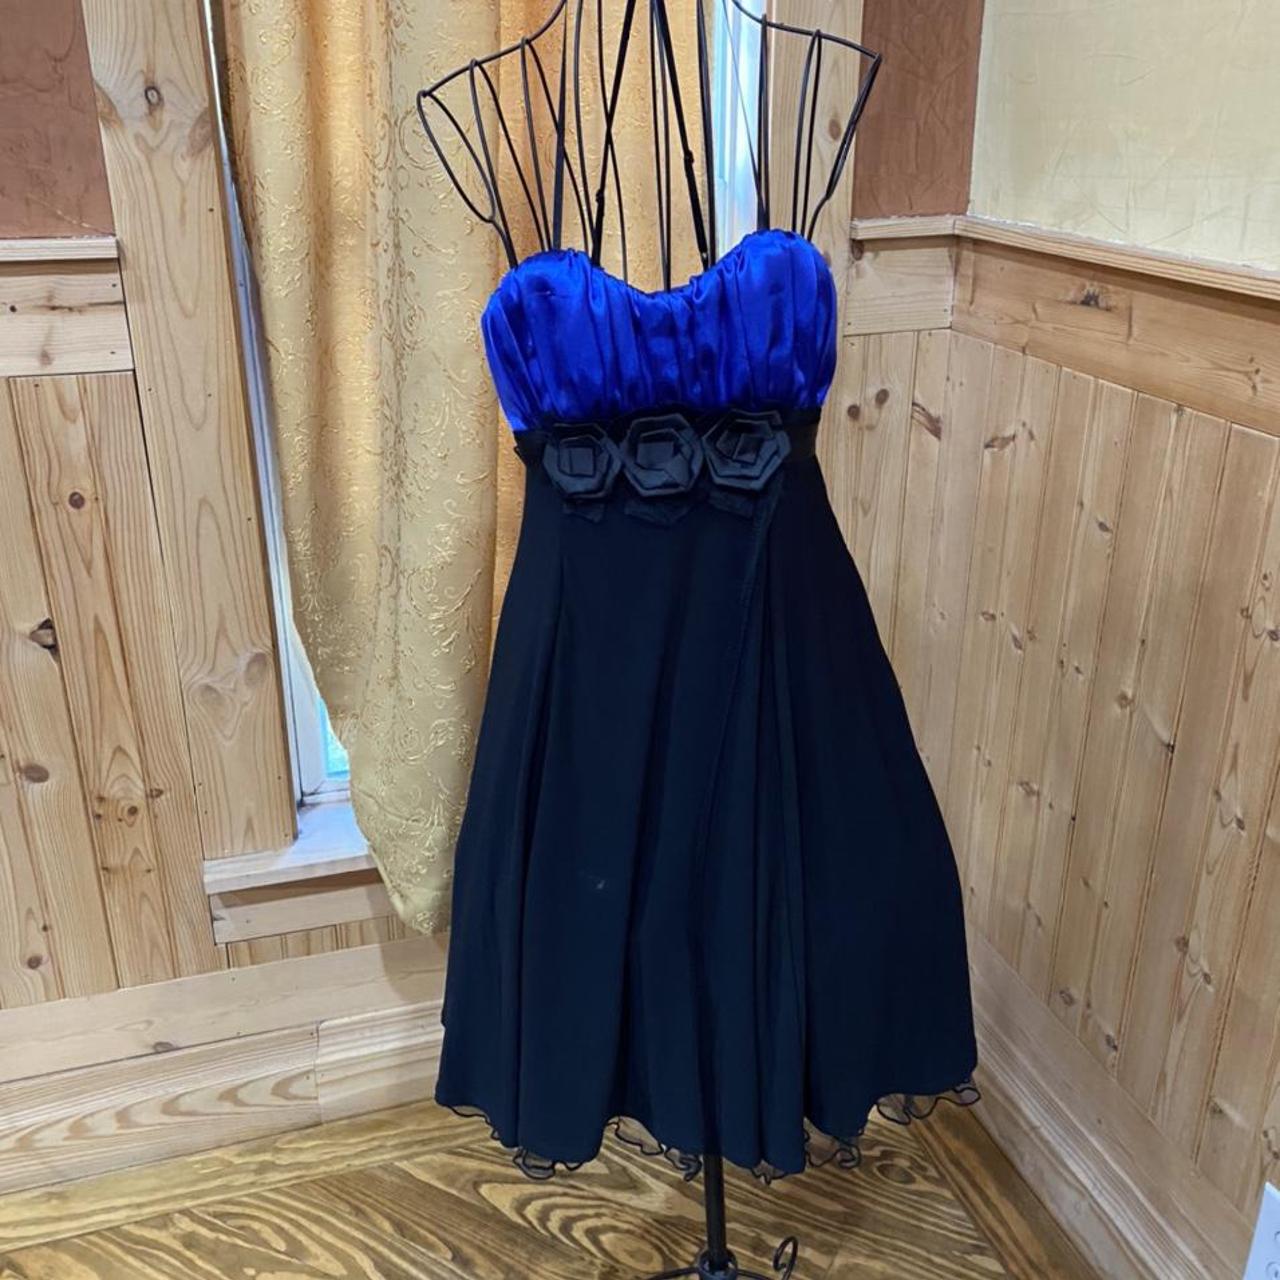 Snap Sights Women's Black and Blue Dress